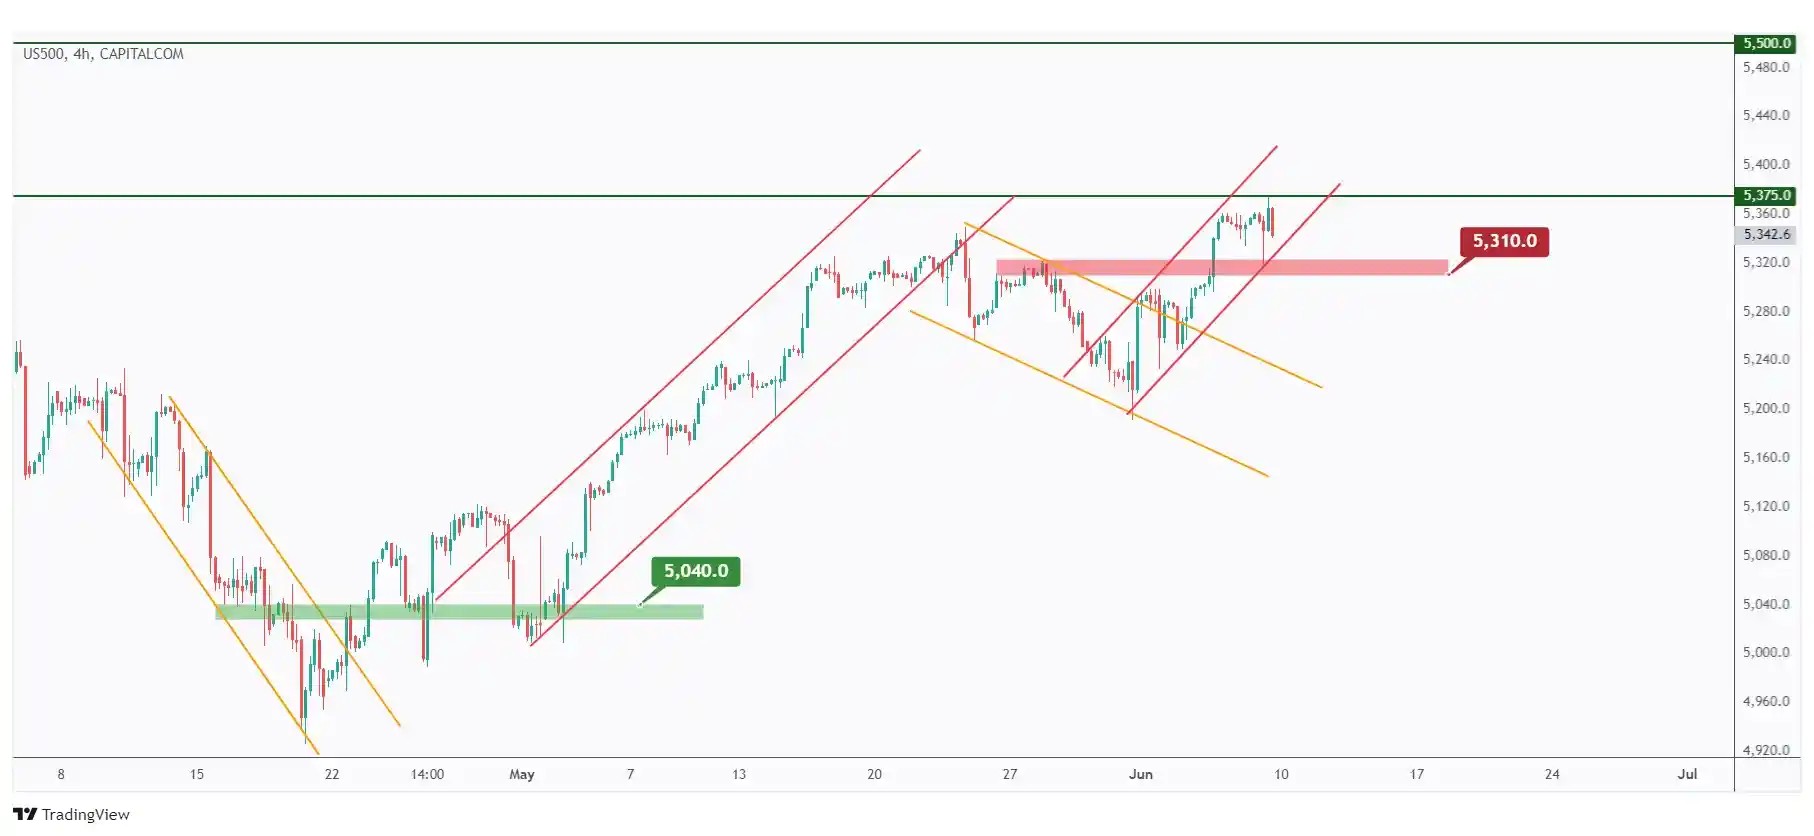 US500 4h chart overall bullish trading within the rising channel as long as the last low at $5,310 holds.